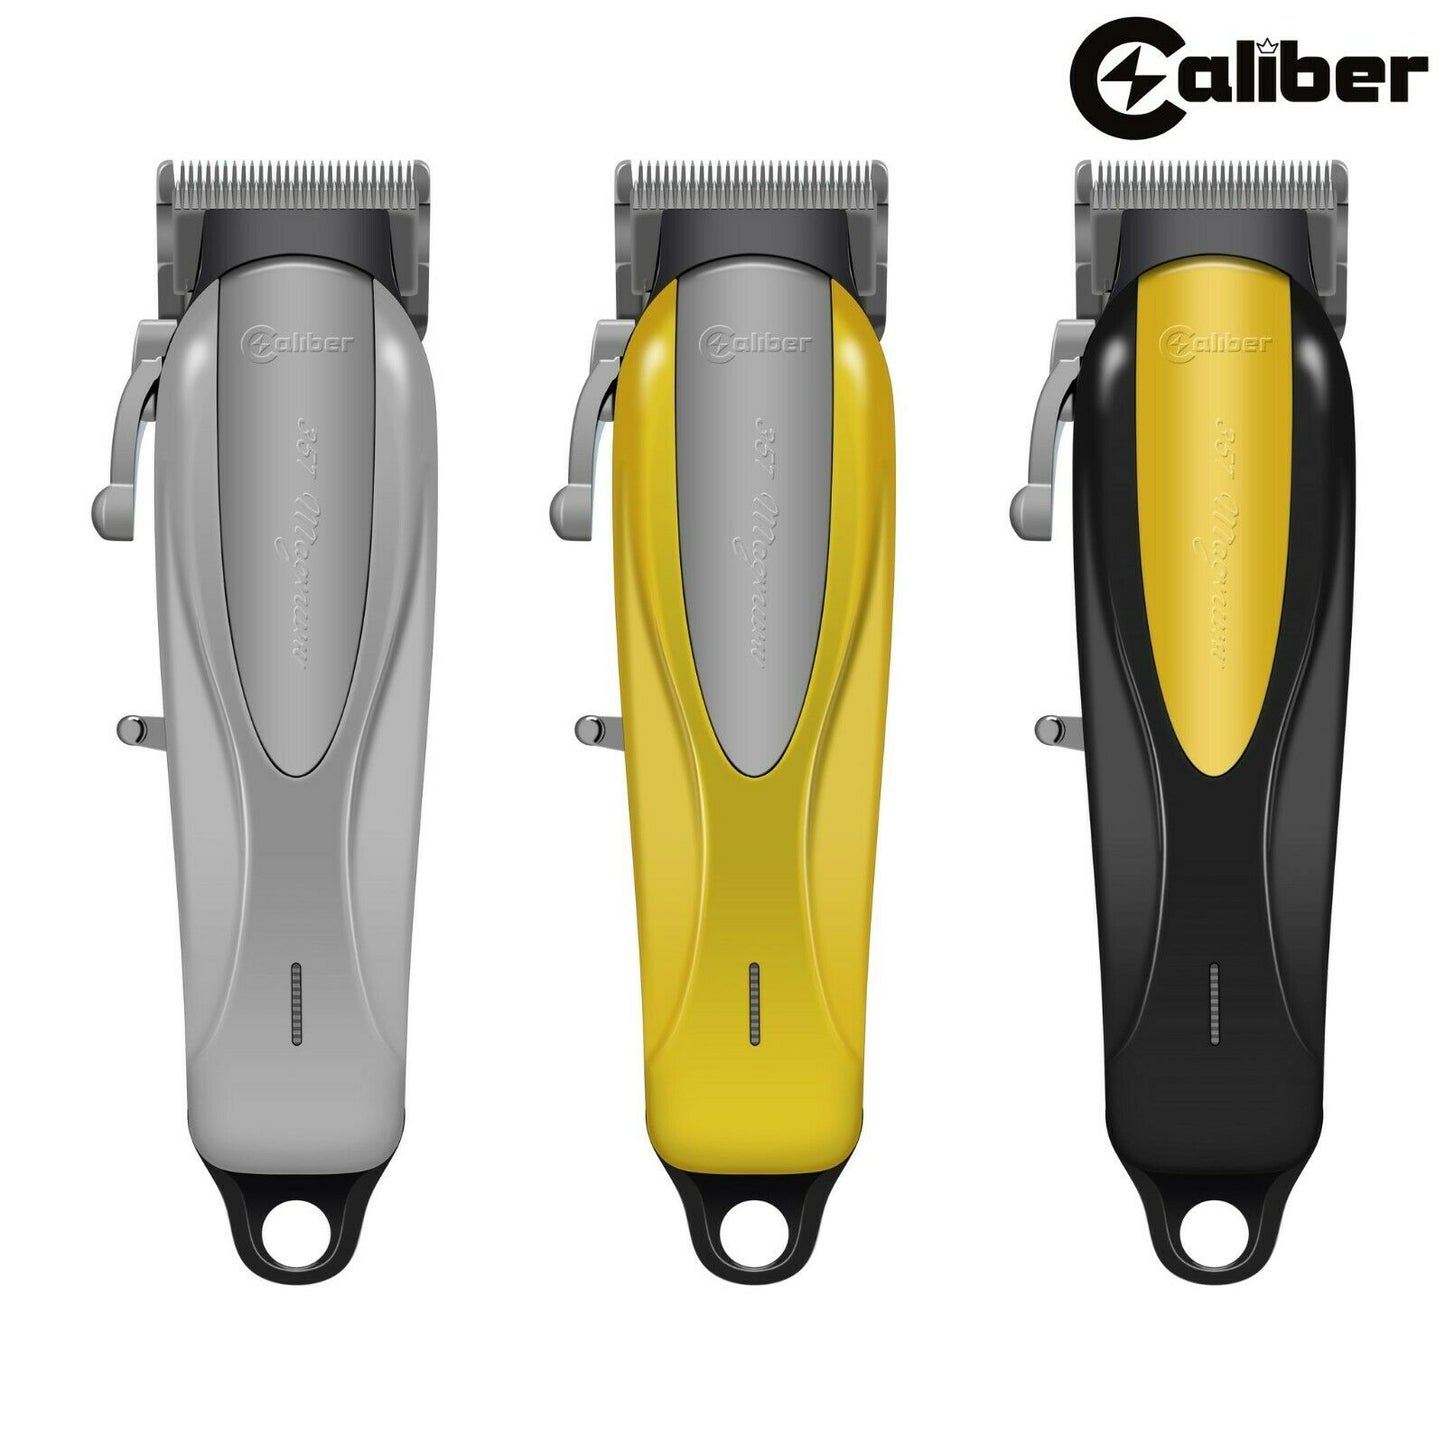 Caliber 357 Magnum Gen 3 Professional Cordless Hair Clipper With Three Color Lid